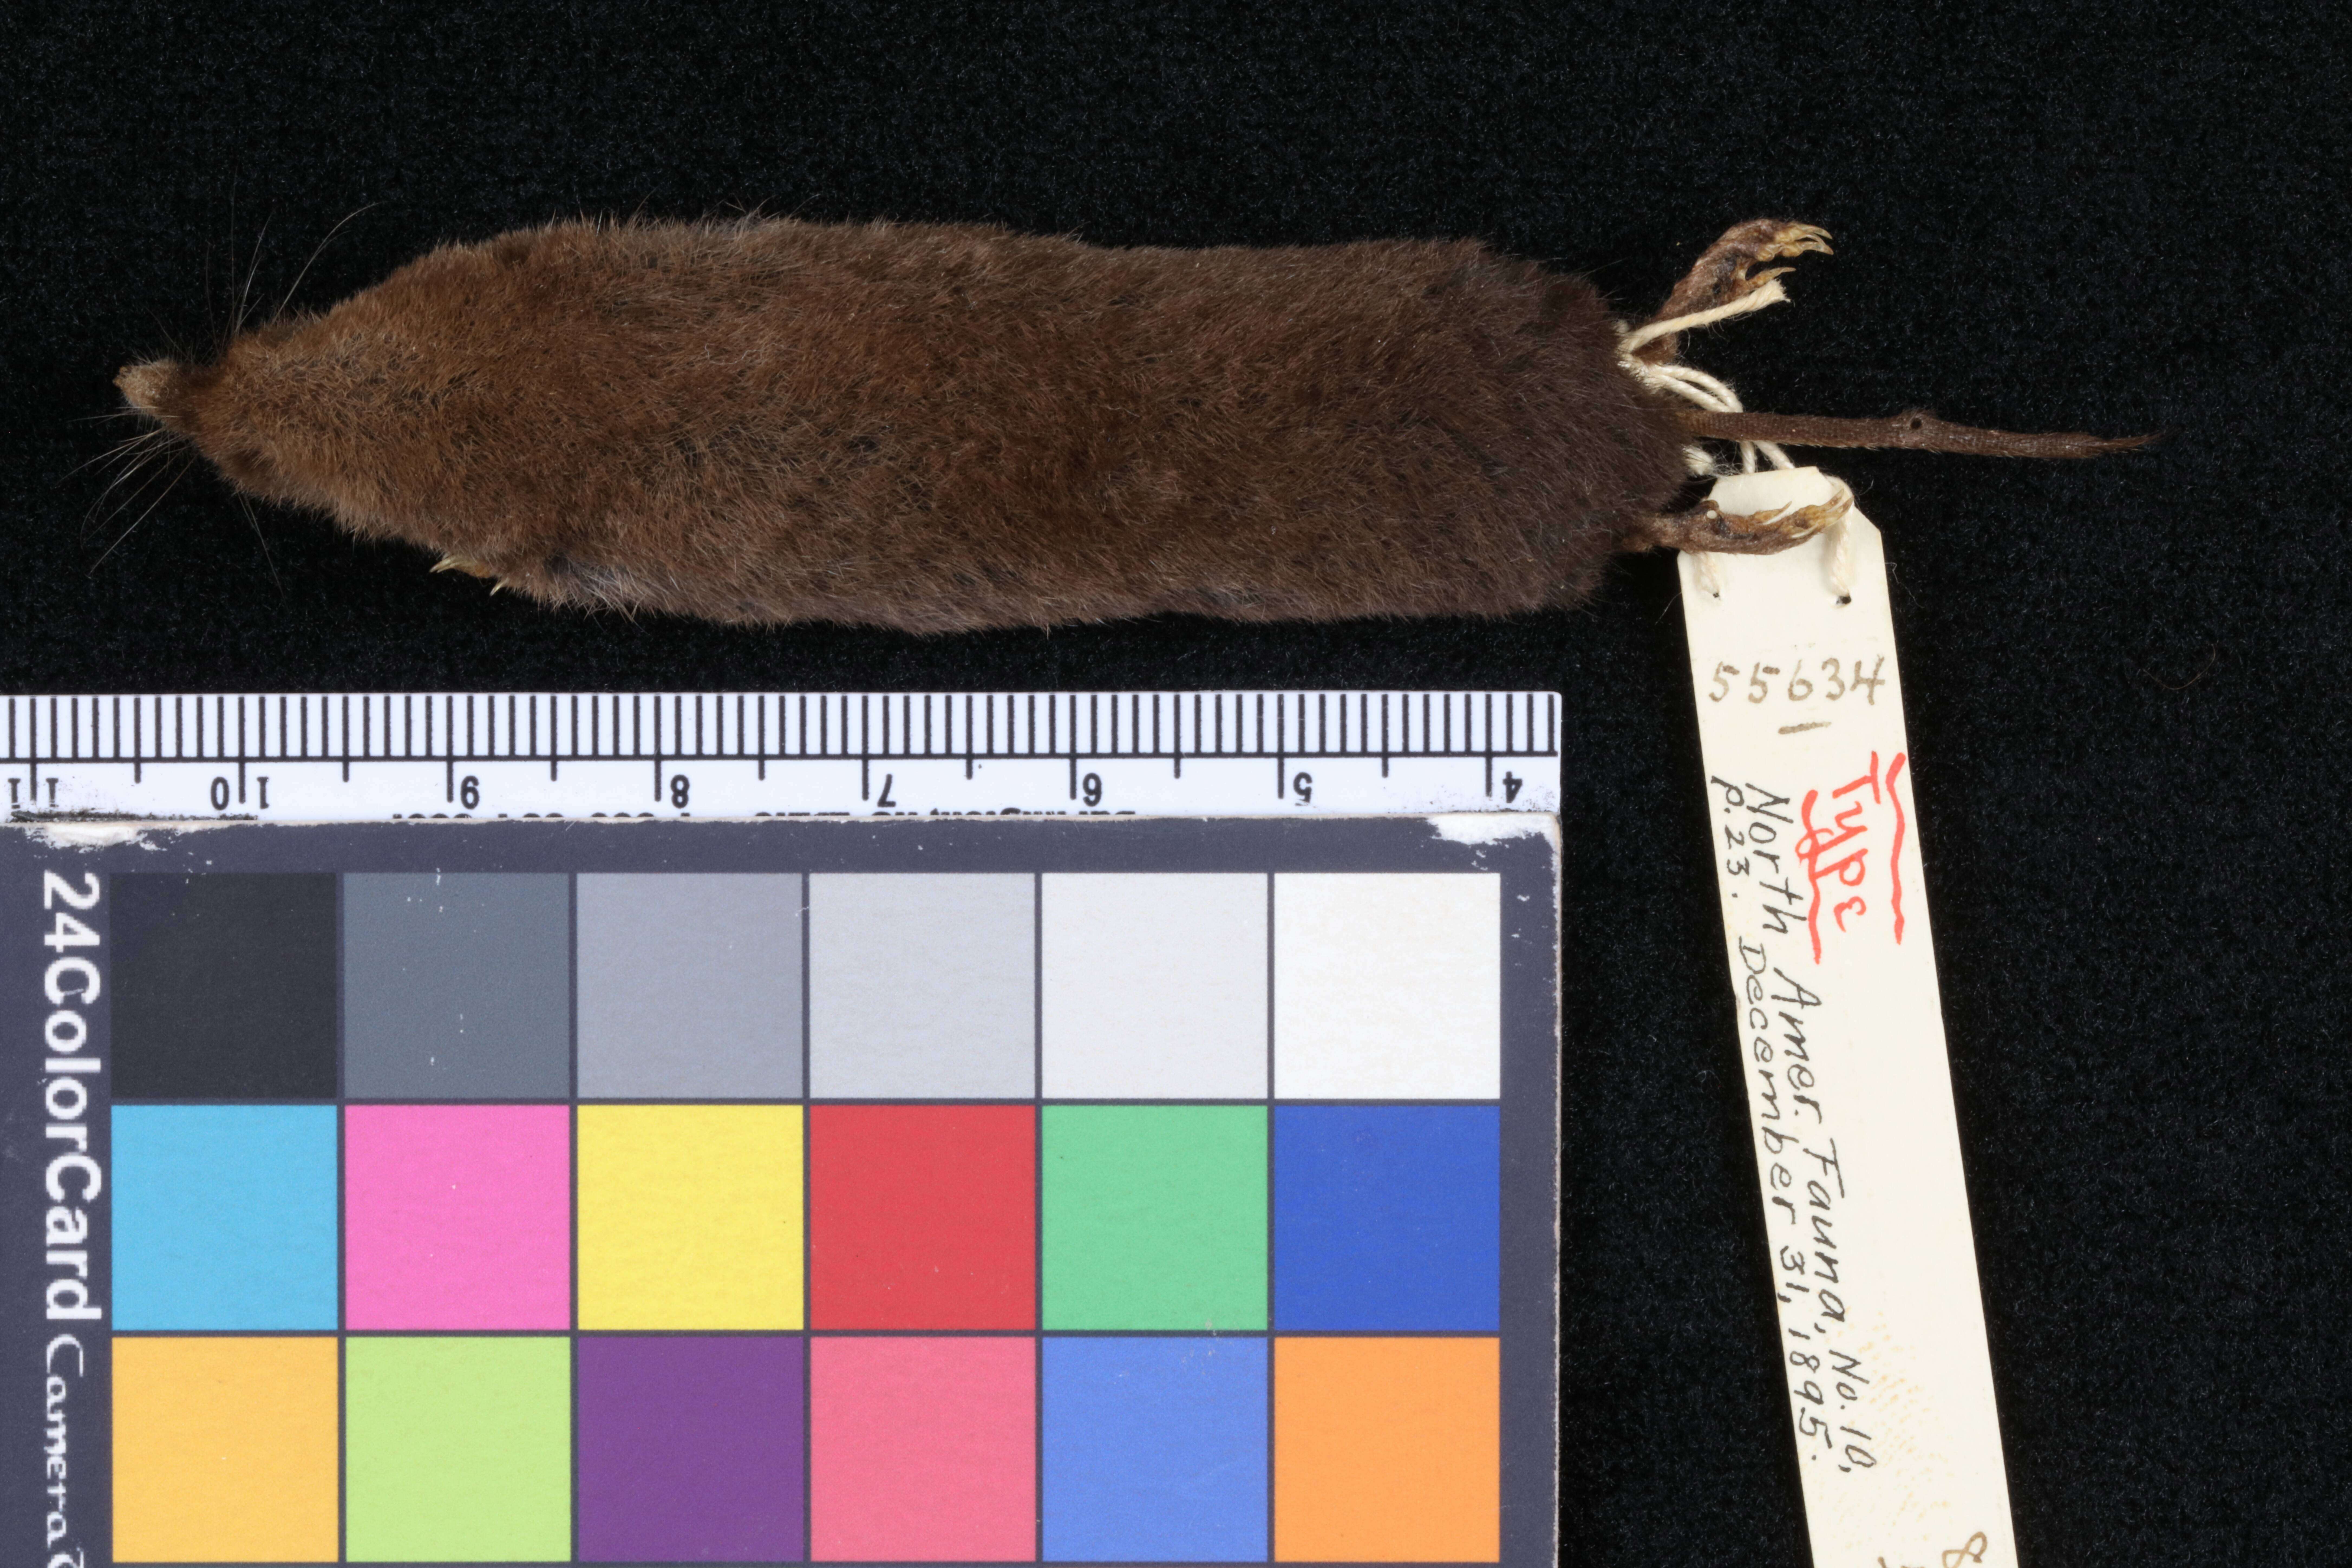 Image of Grizzled Mexican Small-eared Shrew